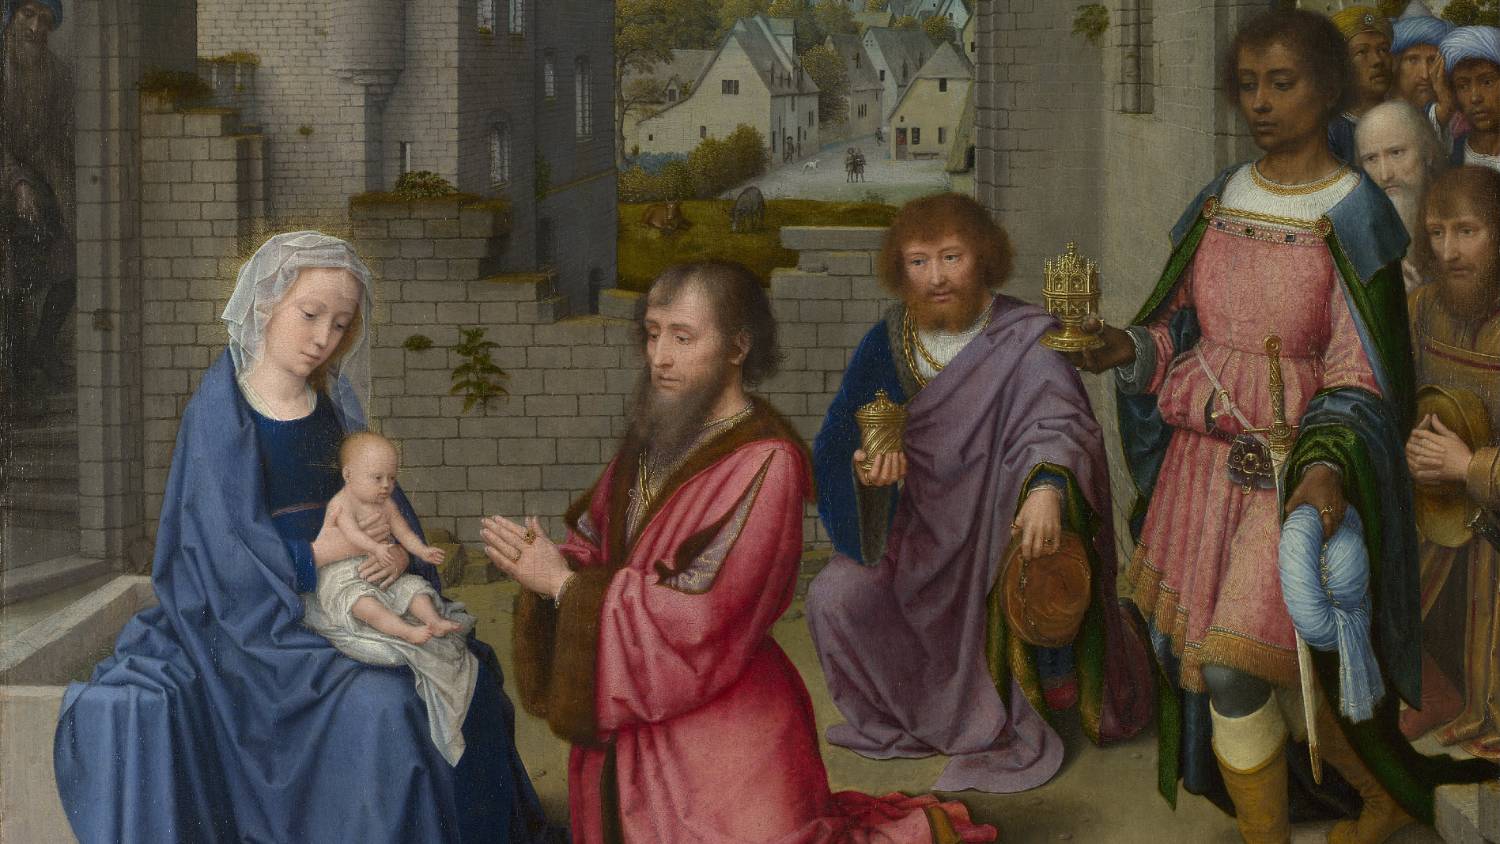 The story of the wise men has inspired artists for generations, seen here in a painting by Gerard David a 16th century Netherlandish painter (Public domain/National Gallery)